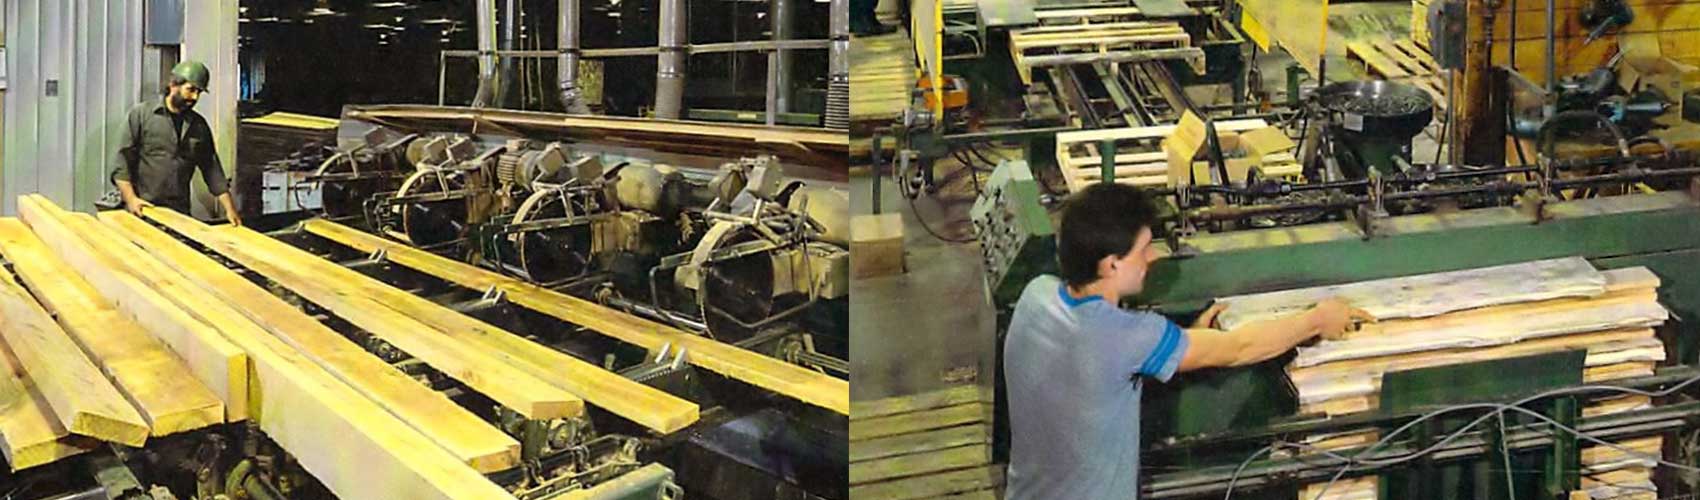 Banner Image, People working on Pallets